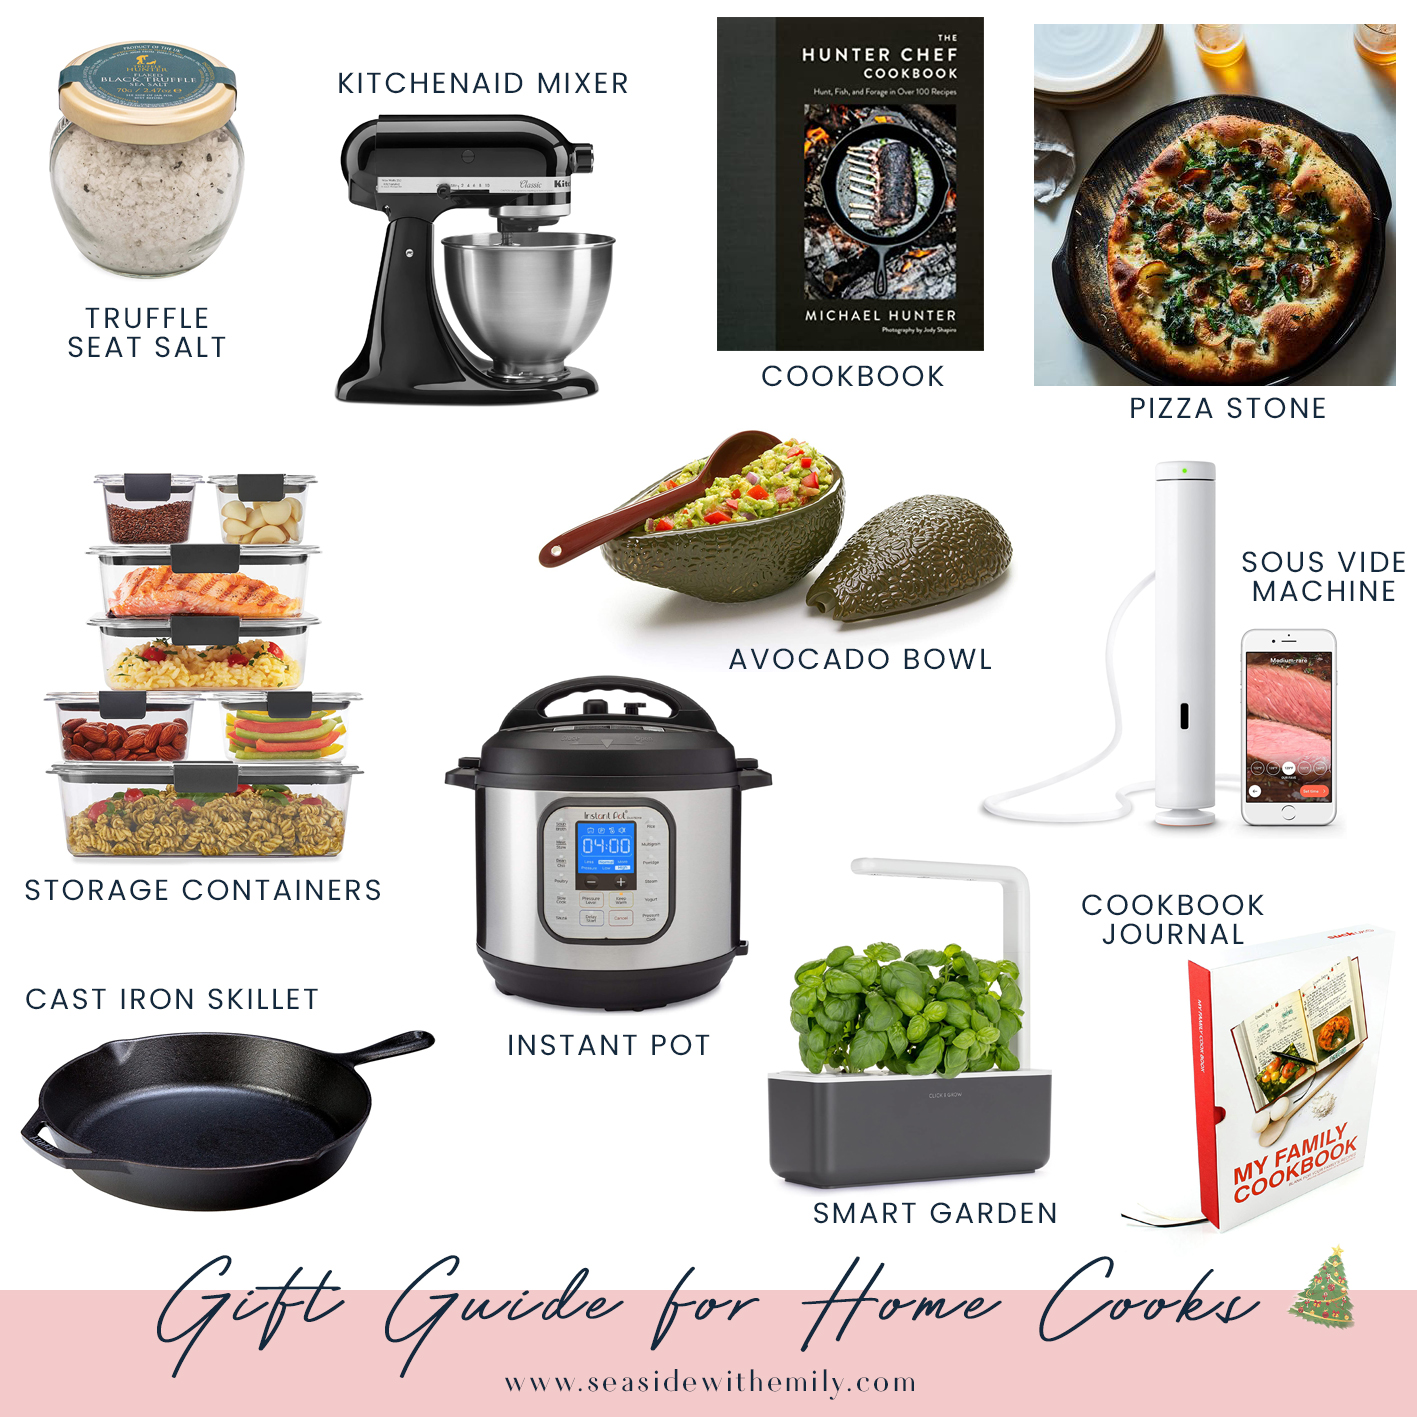 What to Buy a Home Cook for the Holidays, According to Chefs